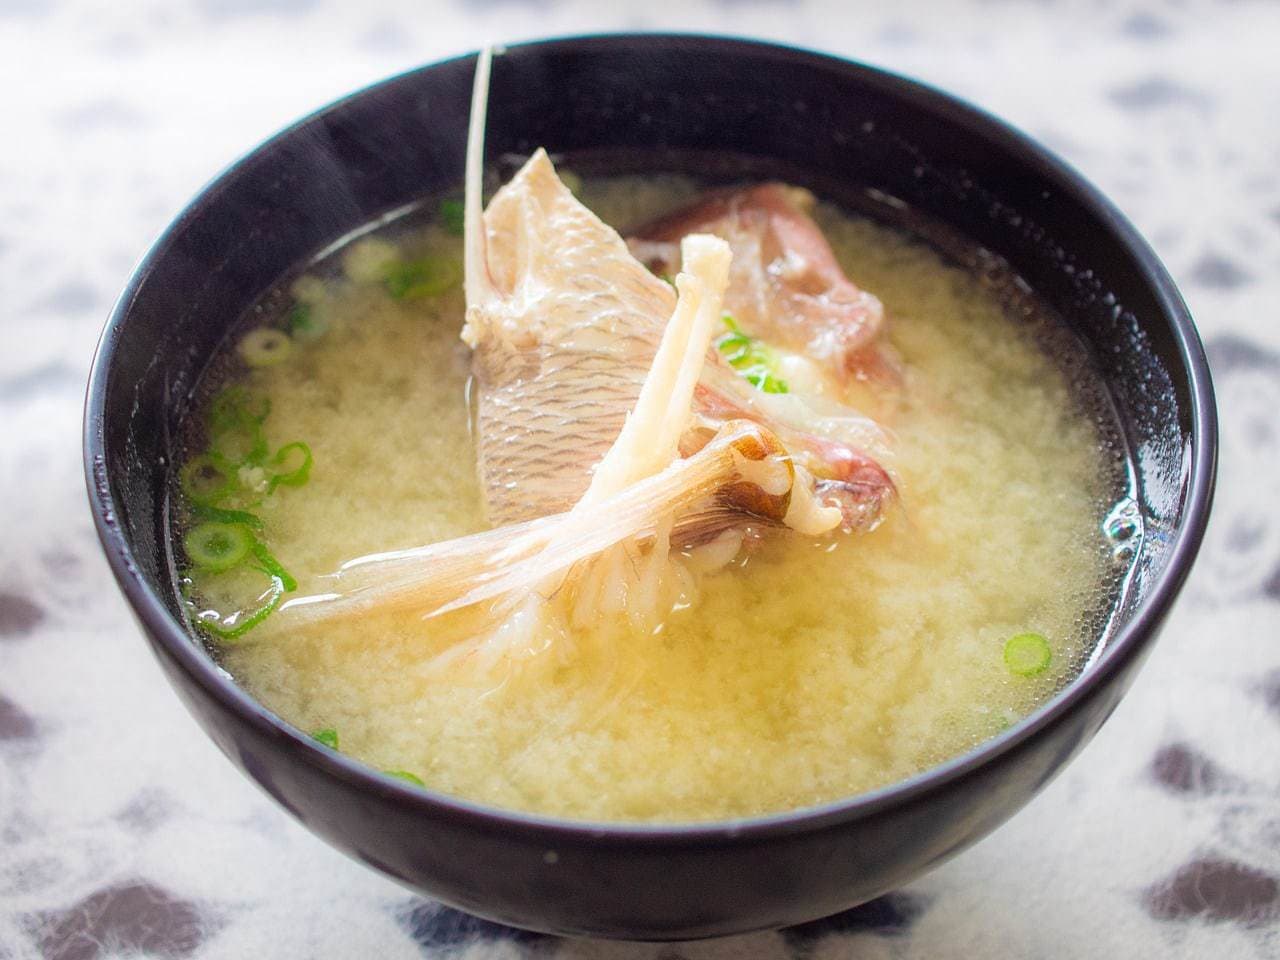 The most popular soup in Japan, miso soup